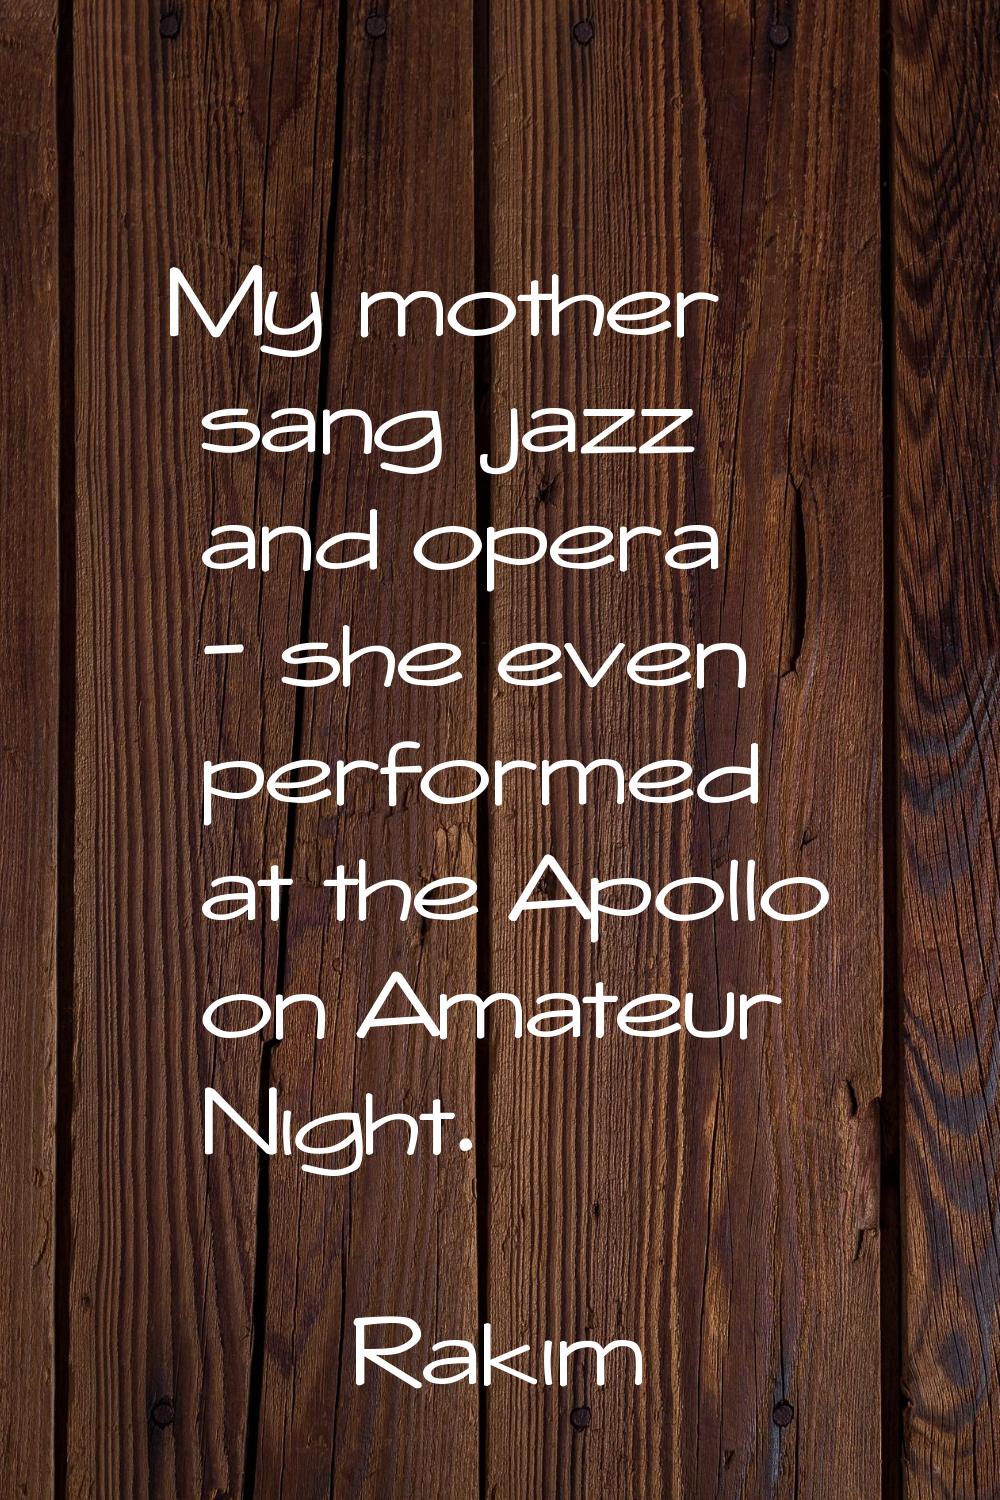 My mother sang jazz and opera - she even performed at the Apollo on Amateur Night.